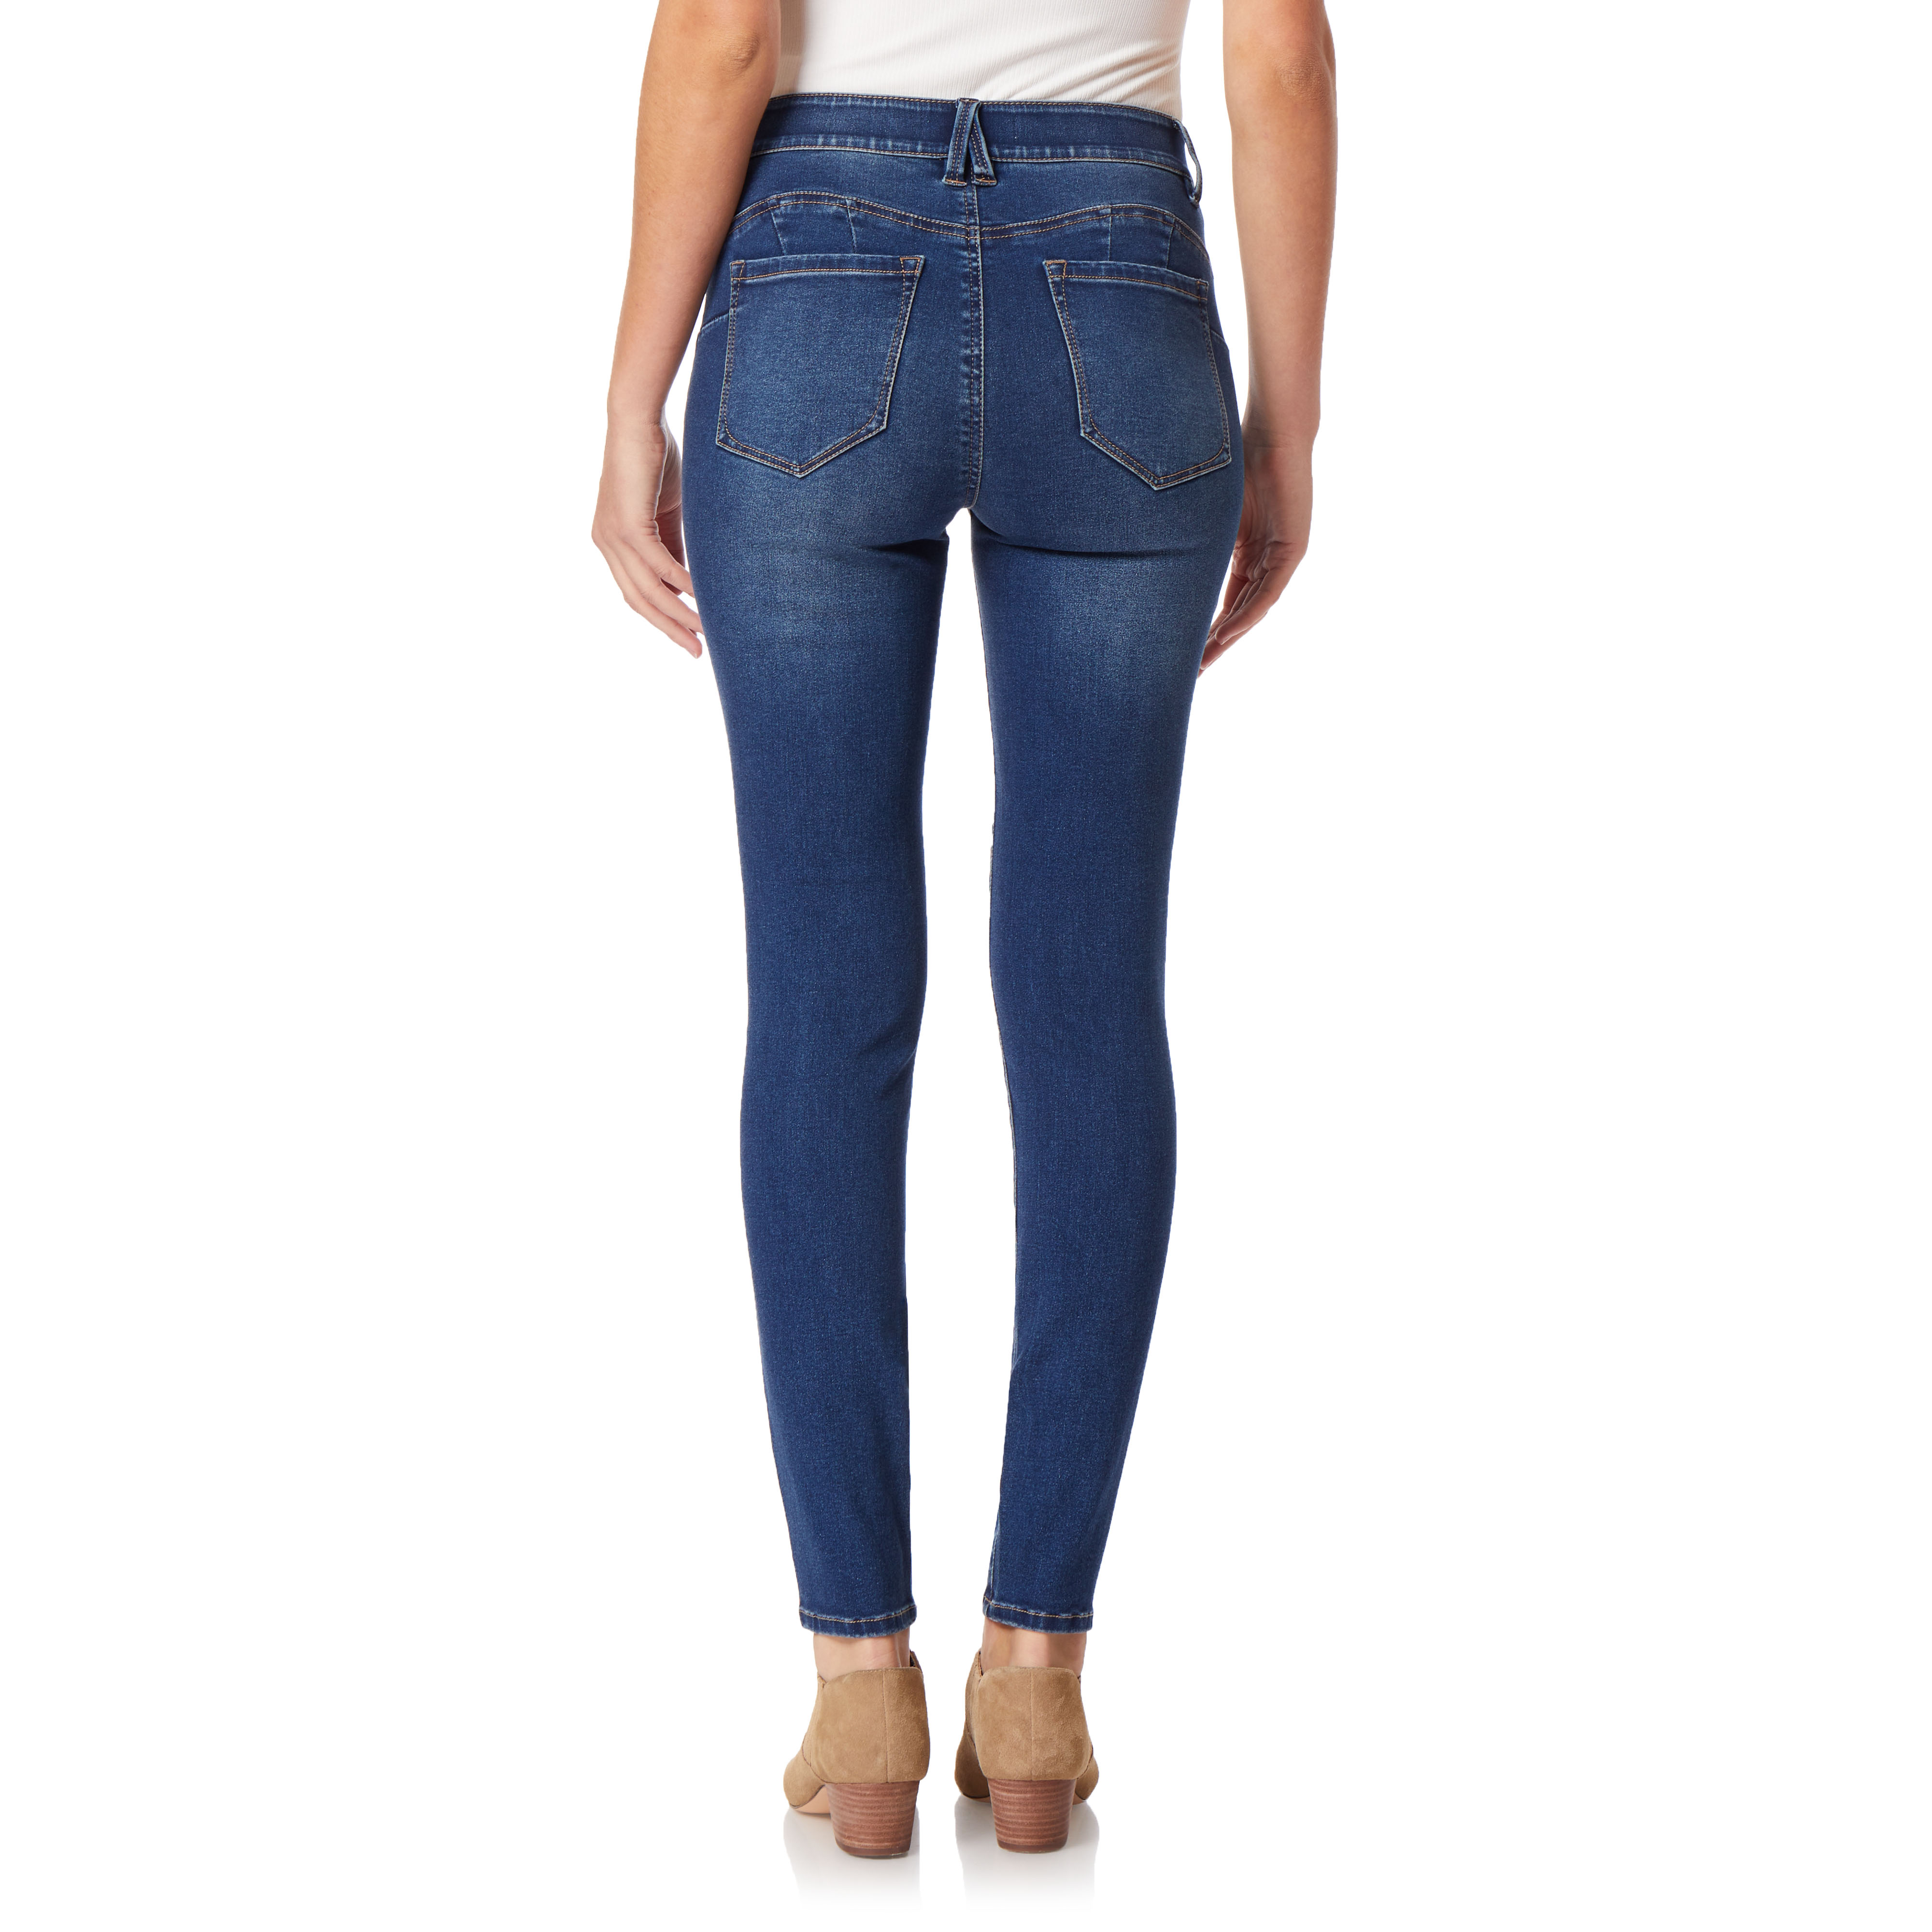 Angels Forever Young Women's Jeanie Lift Skinny Jeans - Walmart.com